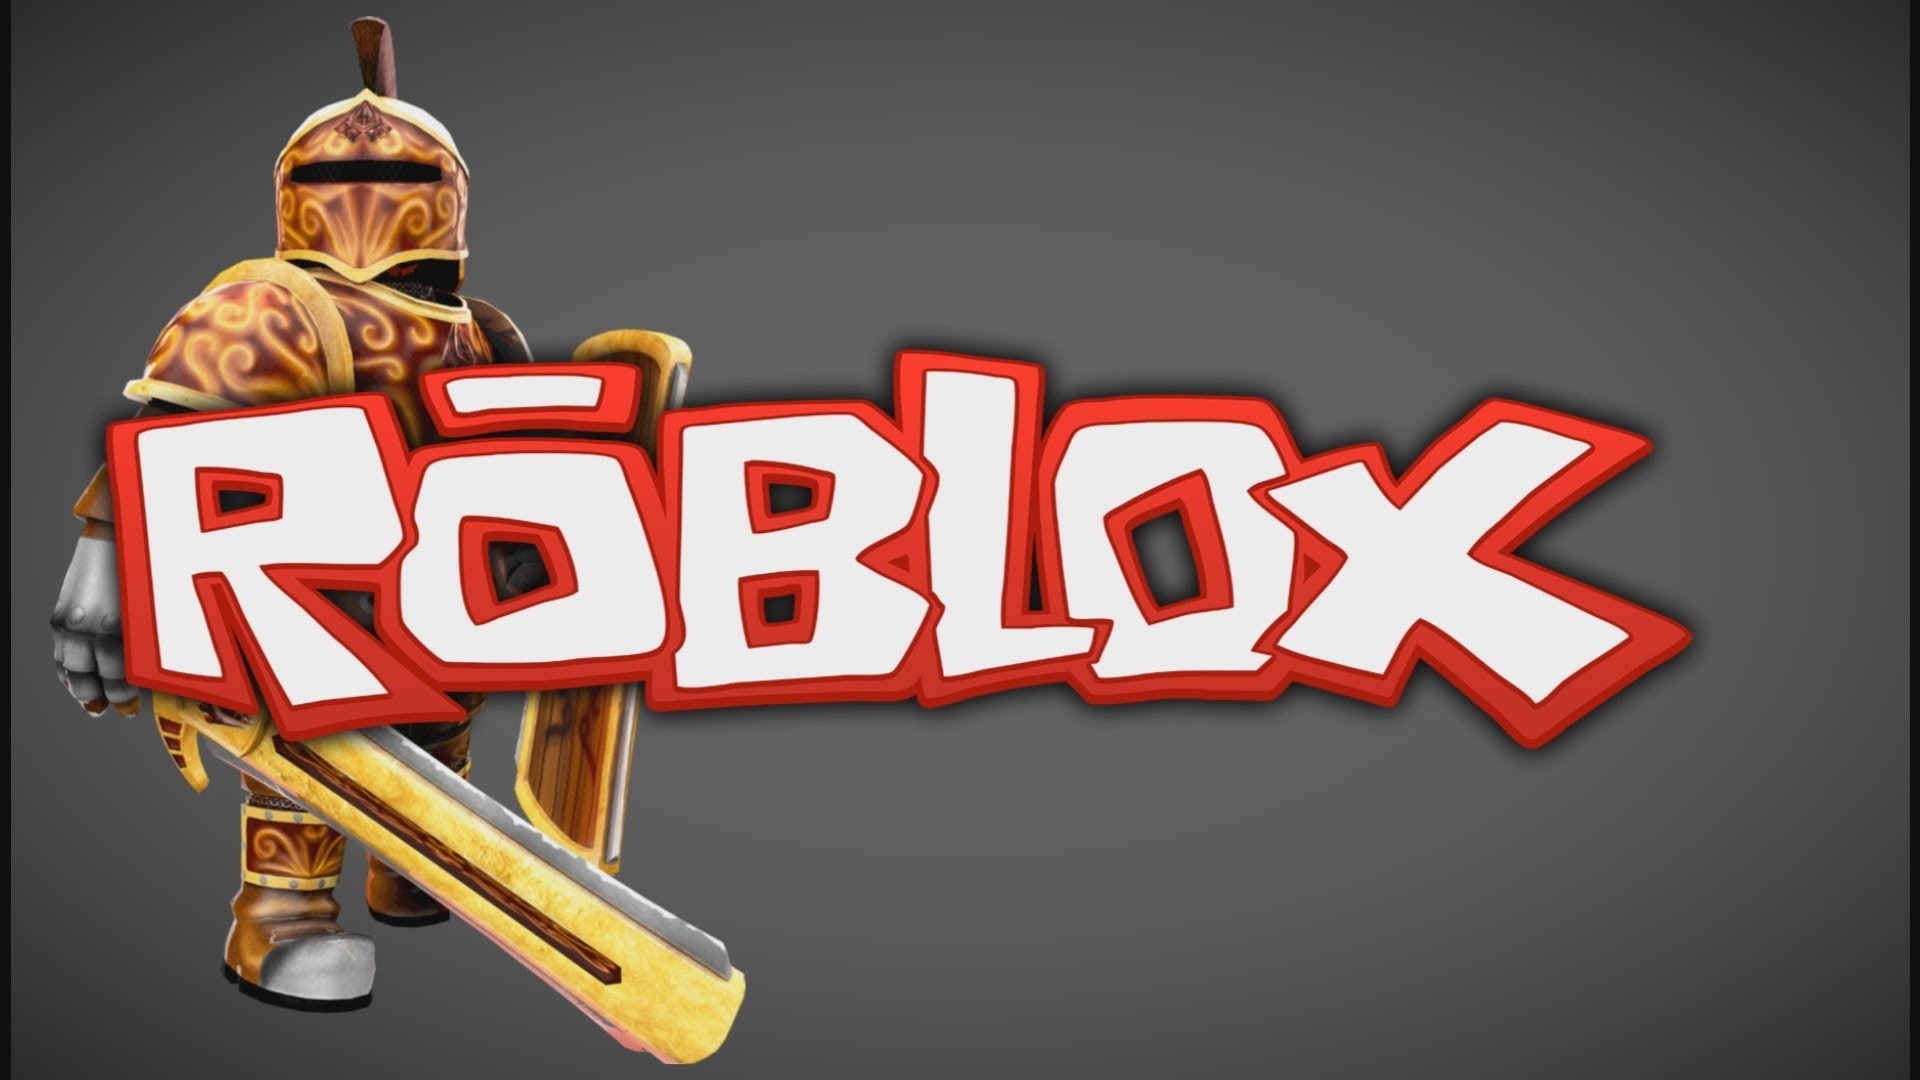 Cool Wallpapers Roblox Roblox Wallpapers Wallpaper Cave Download For Free On All Your Devices Computer Smartphone Or Tablet Kumpulan Alamat Grapari Telkomsel Dan Alamat Bank - cool roblox background images